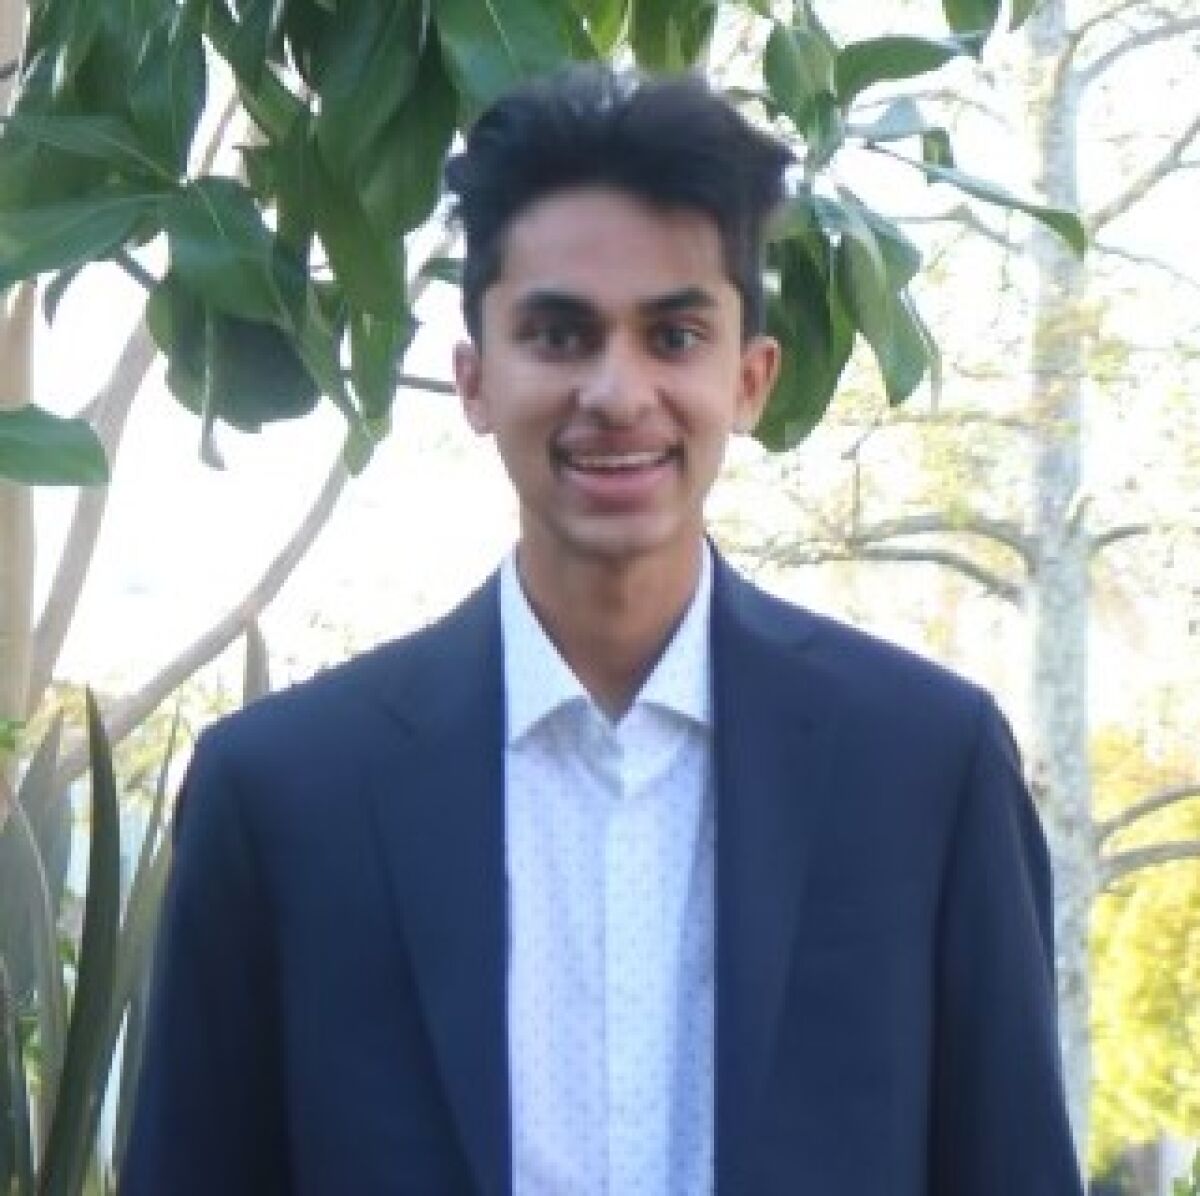 Roshan Shah, a 17-year-old PUSD student, has started the organization VoicesGo.